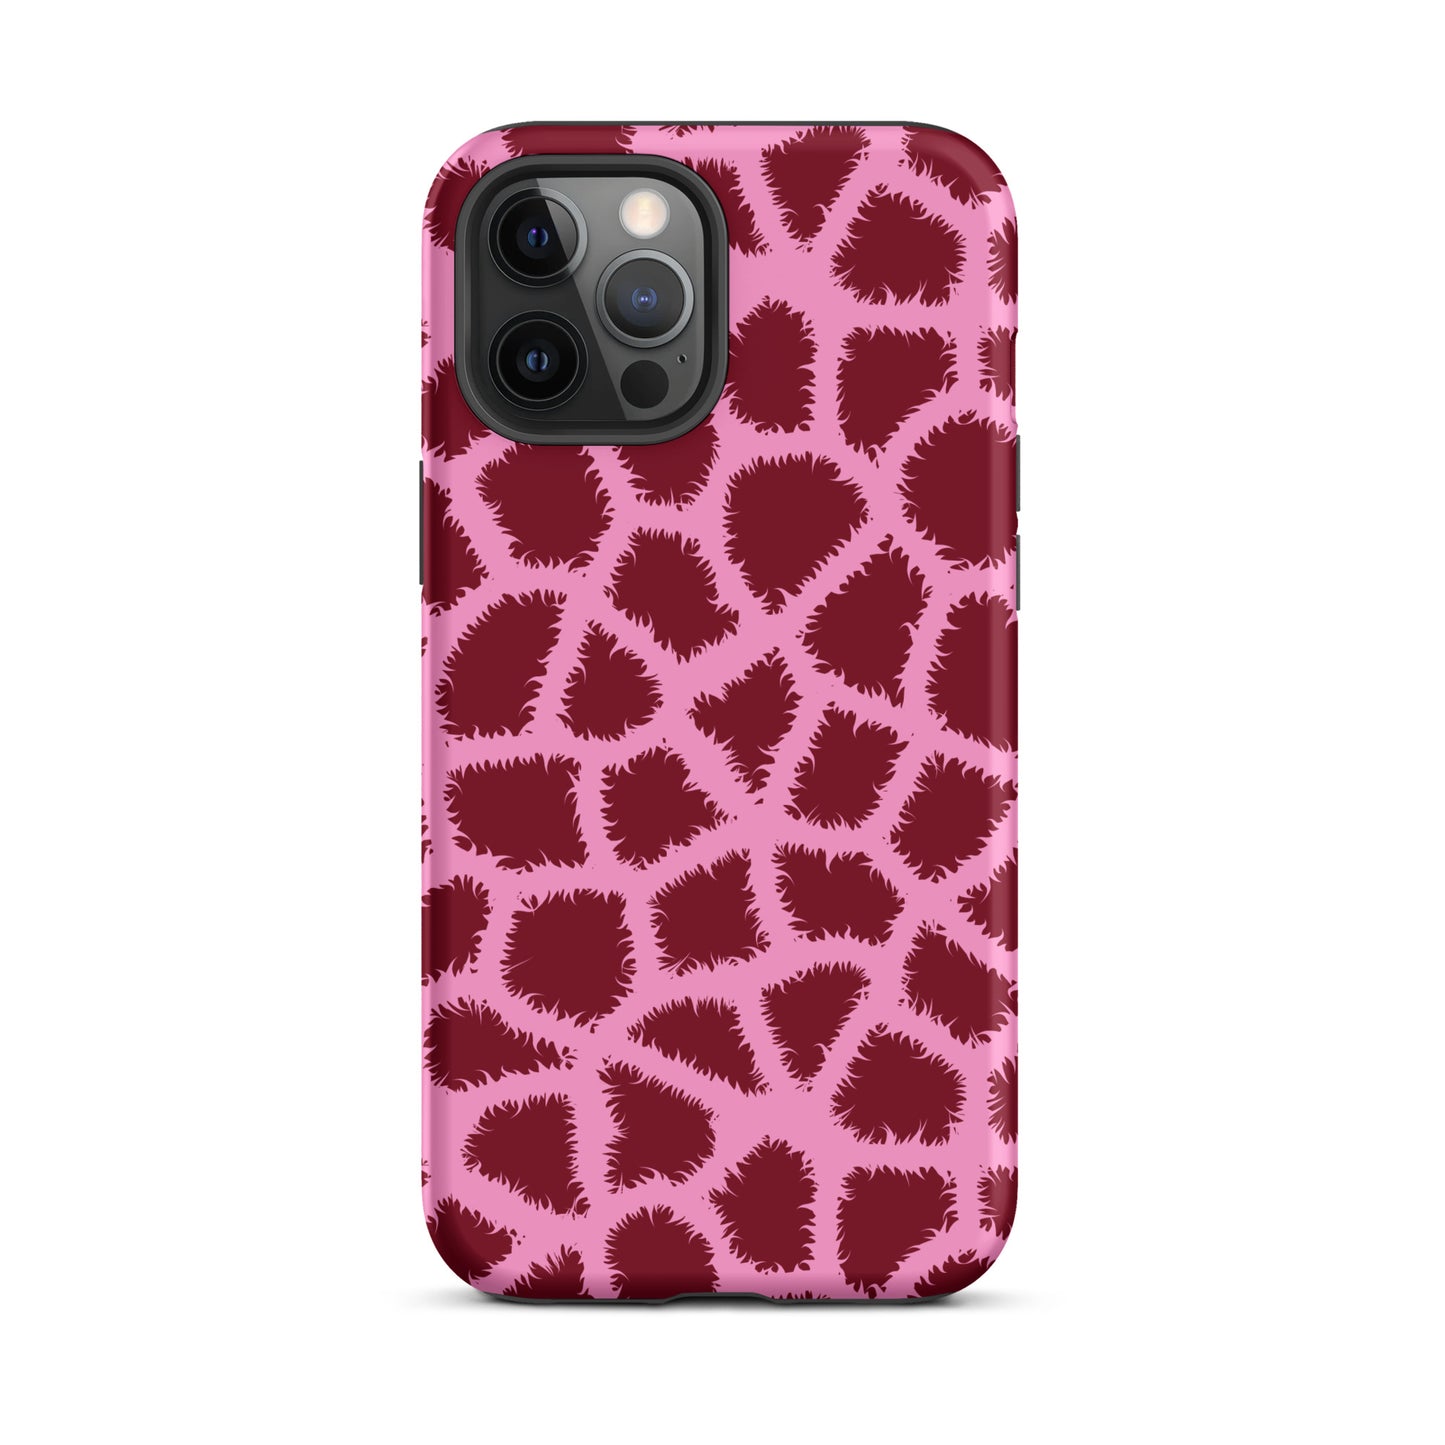 That's a Giraffe of a Different Color iPhone® Case